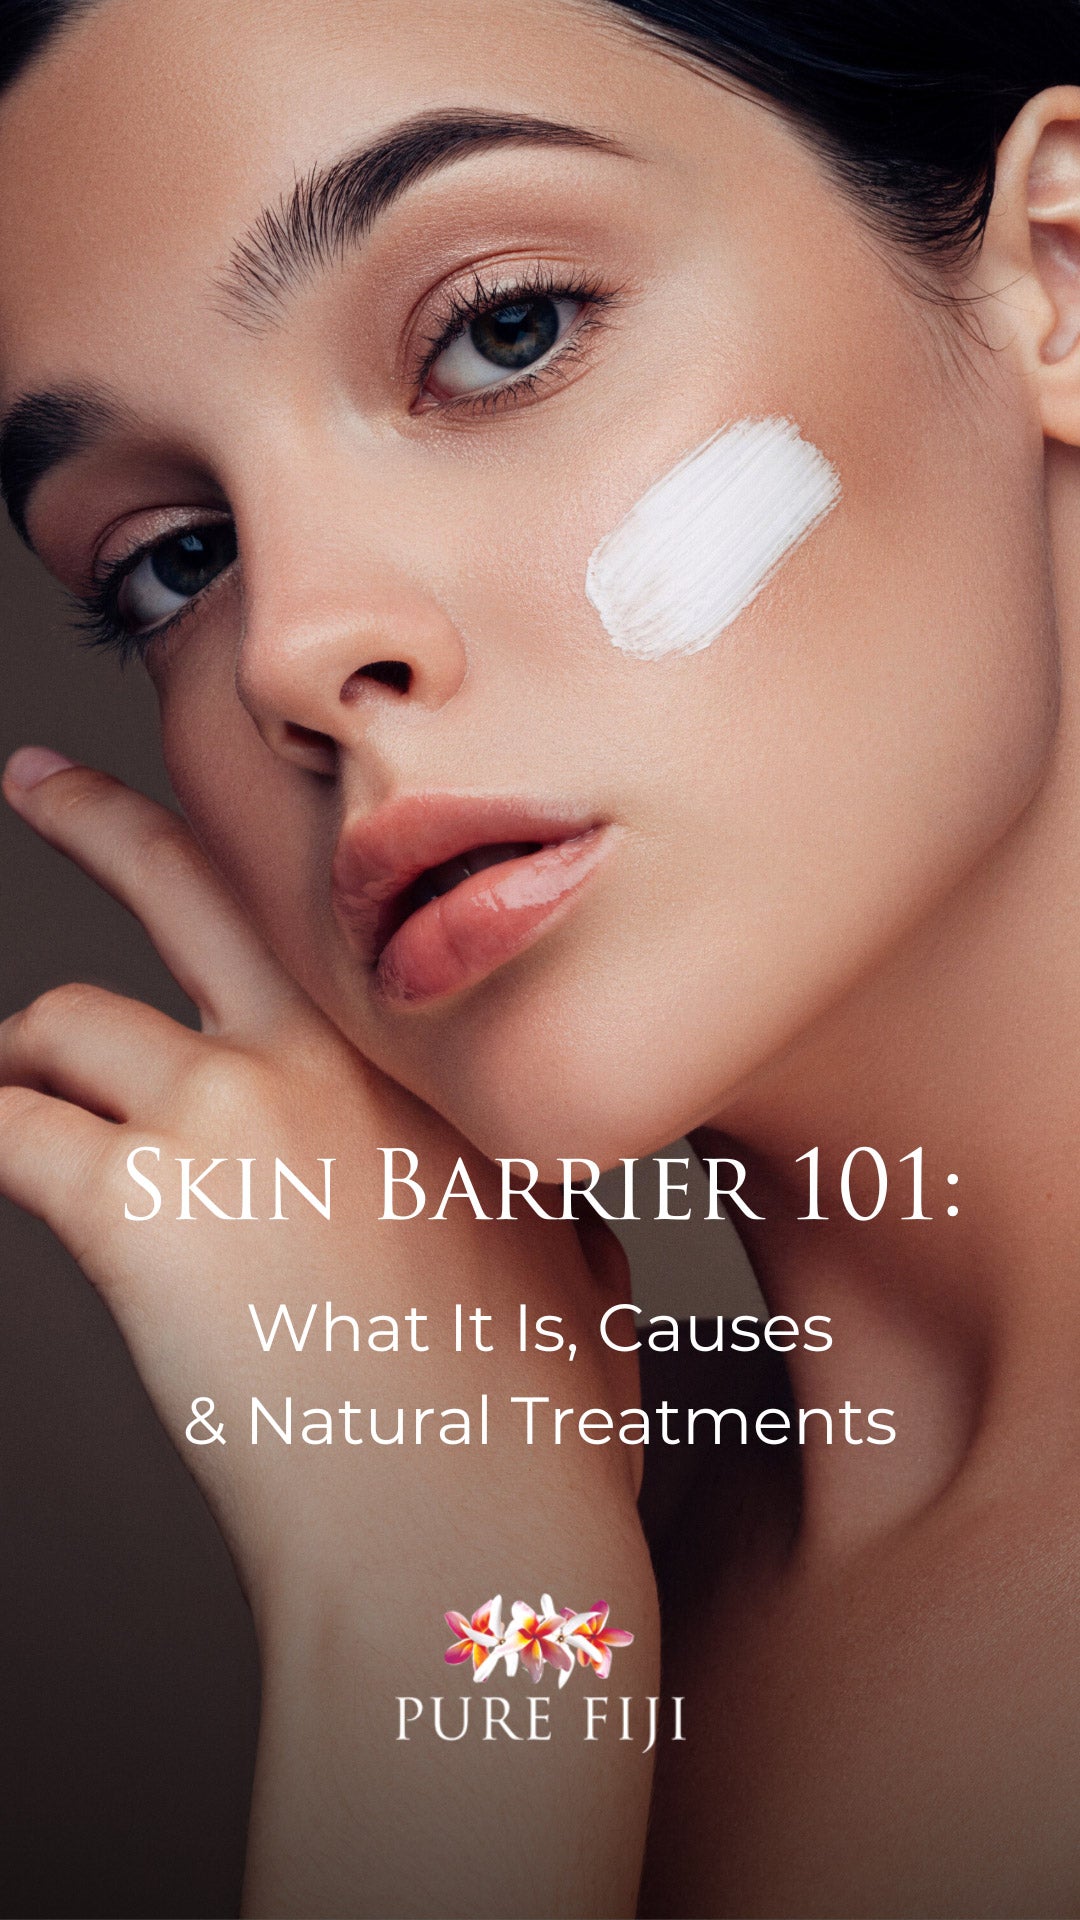 Skin Barrier 101: What It Is, Causes & Natural Treatments